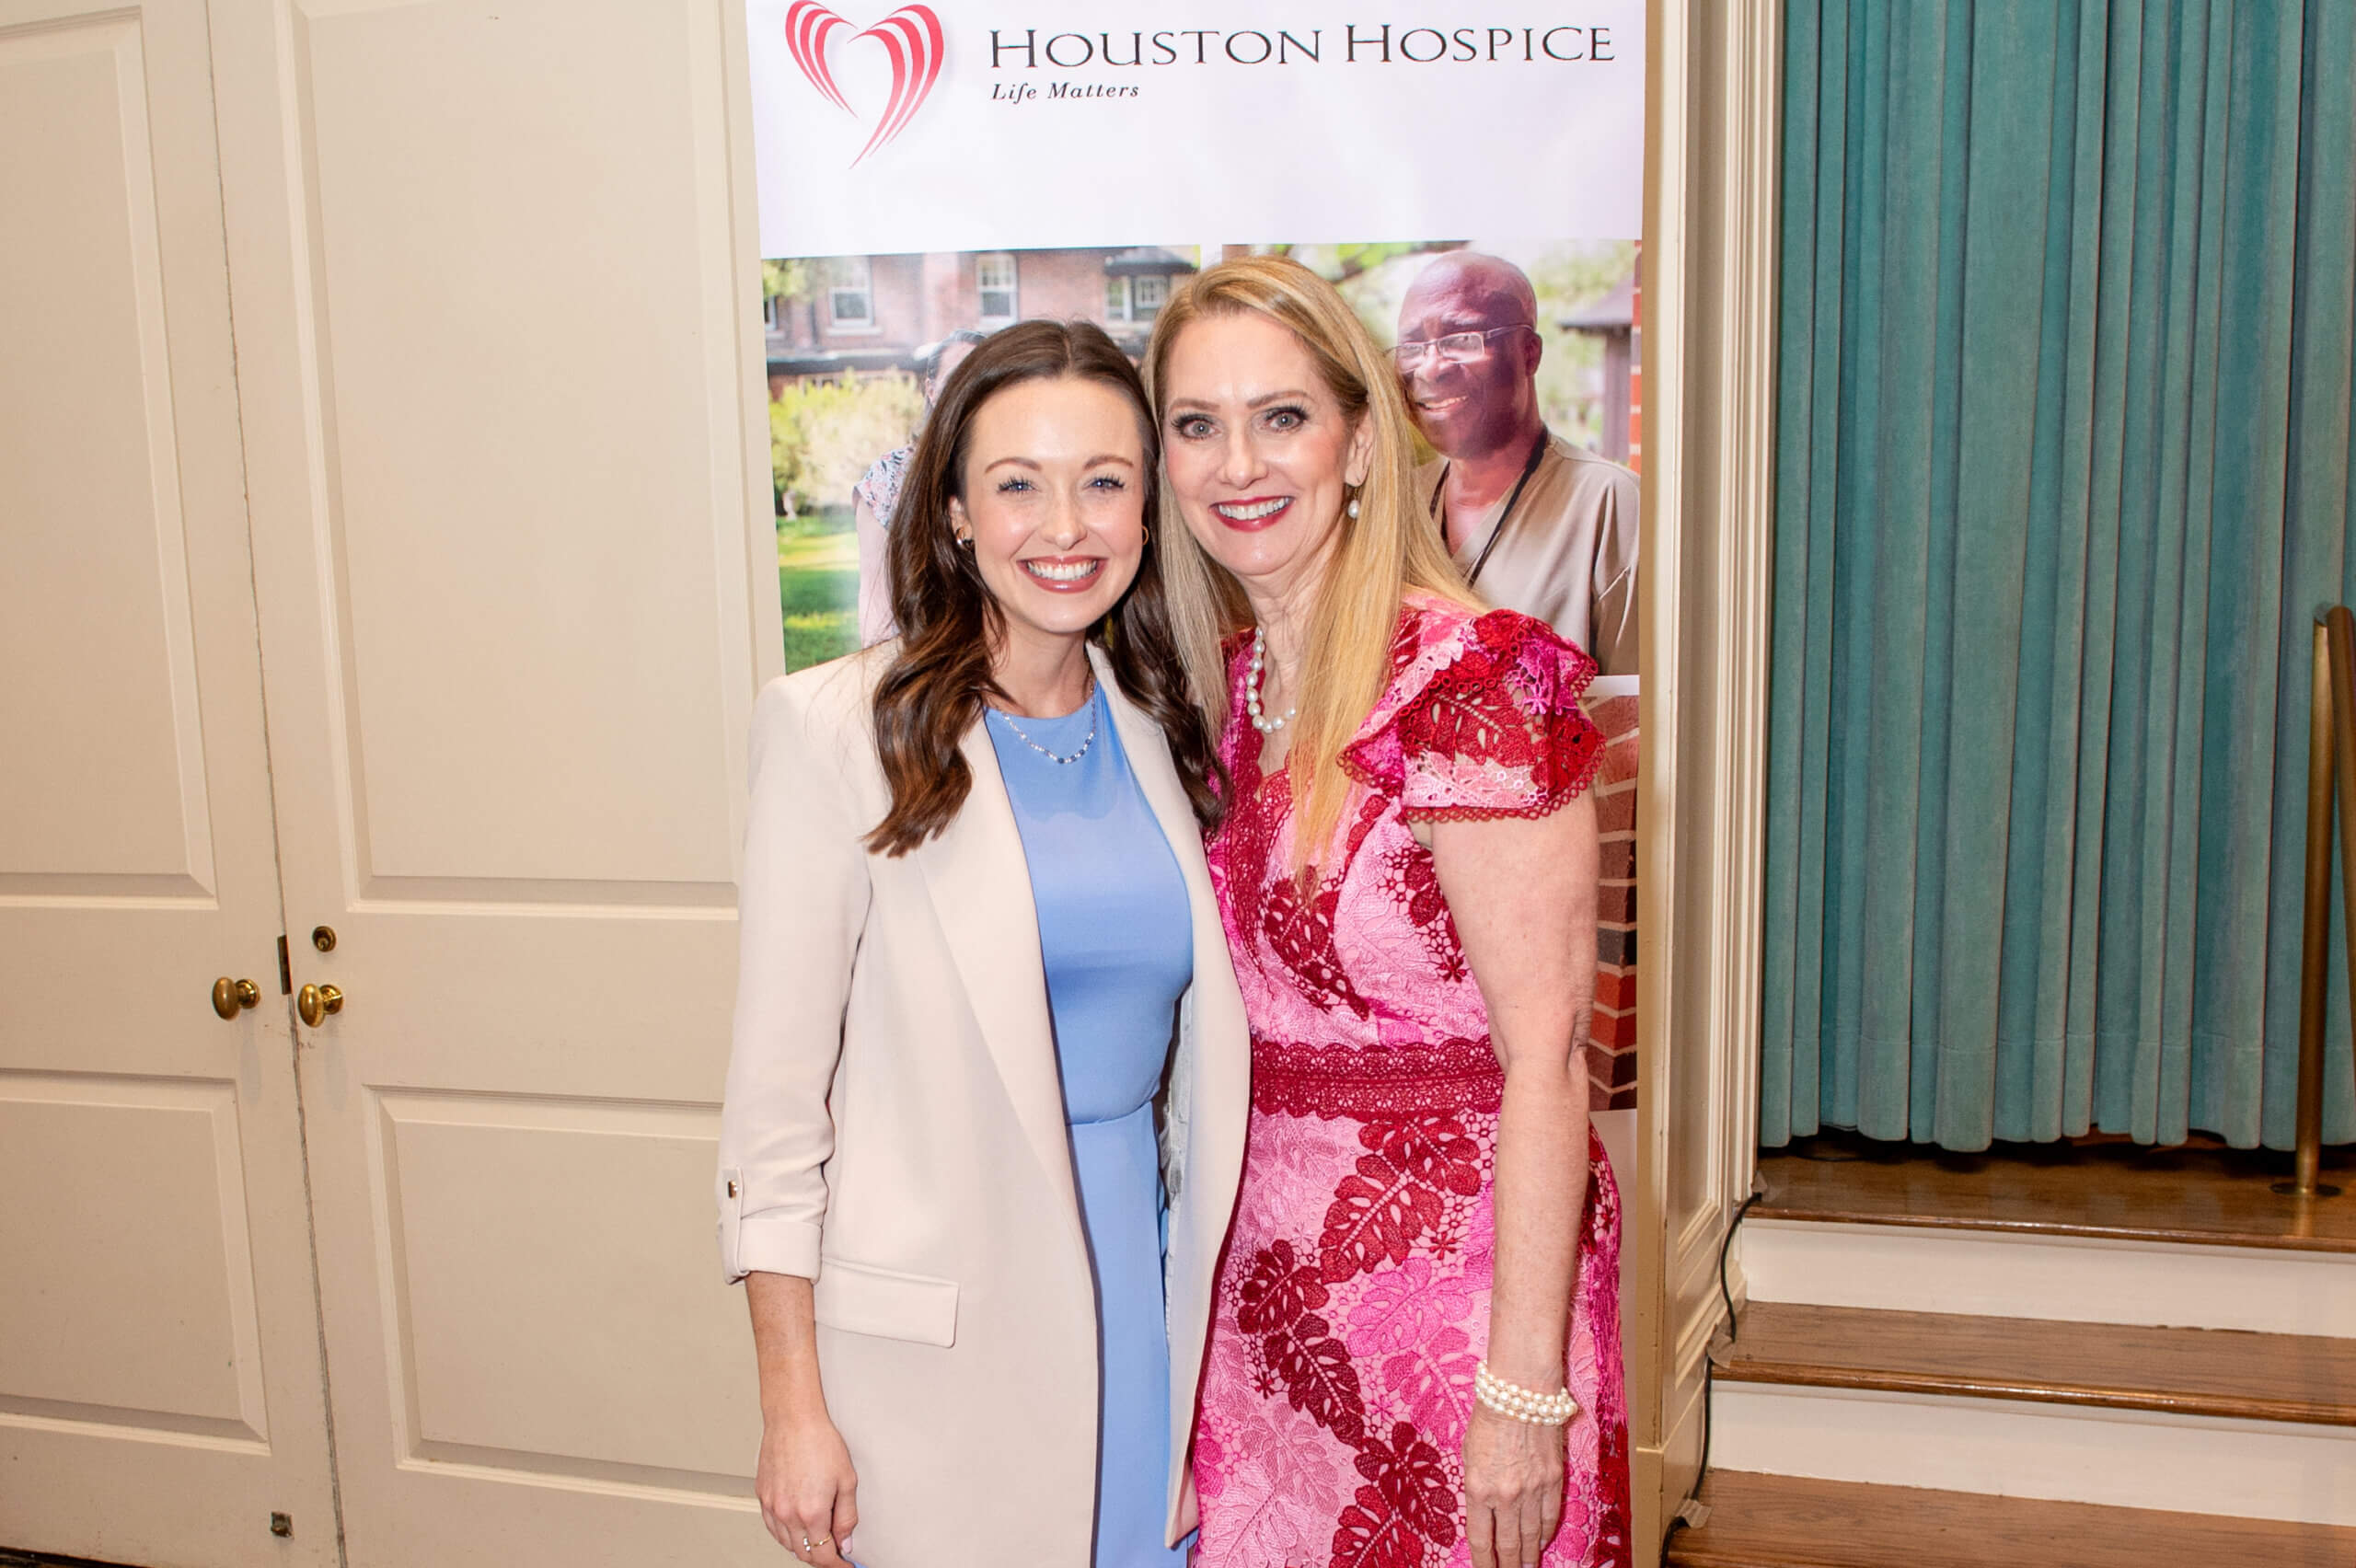 Nurse Hadley pictured with Rana McClelland, Houston Hospice president and CEO